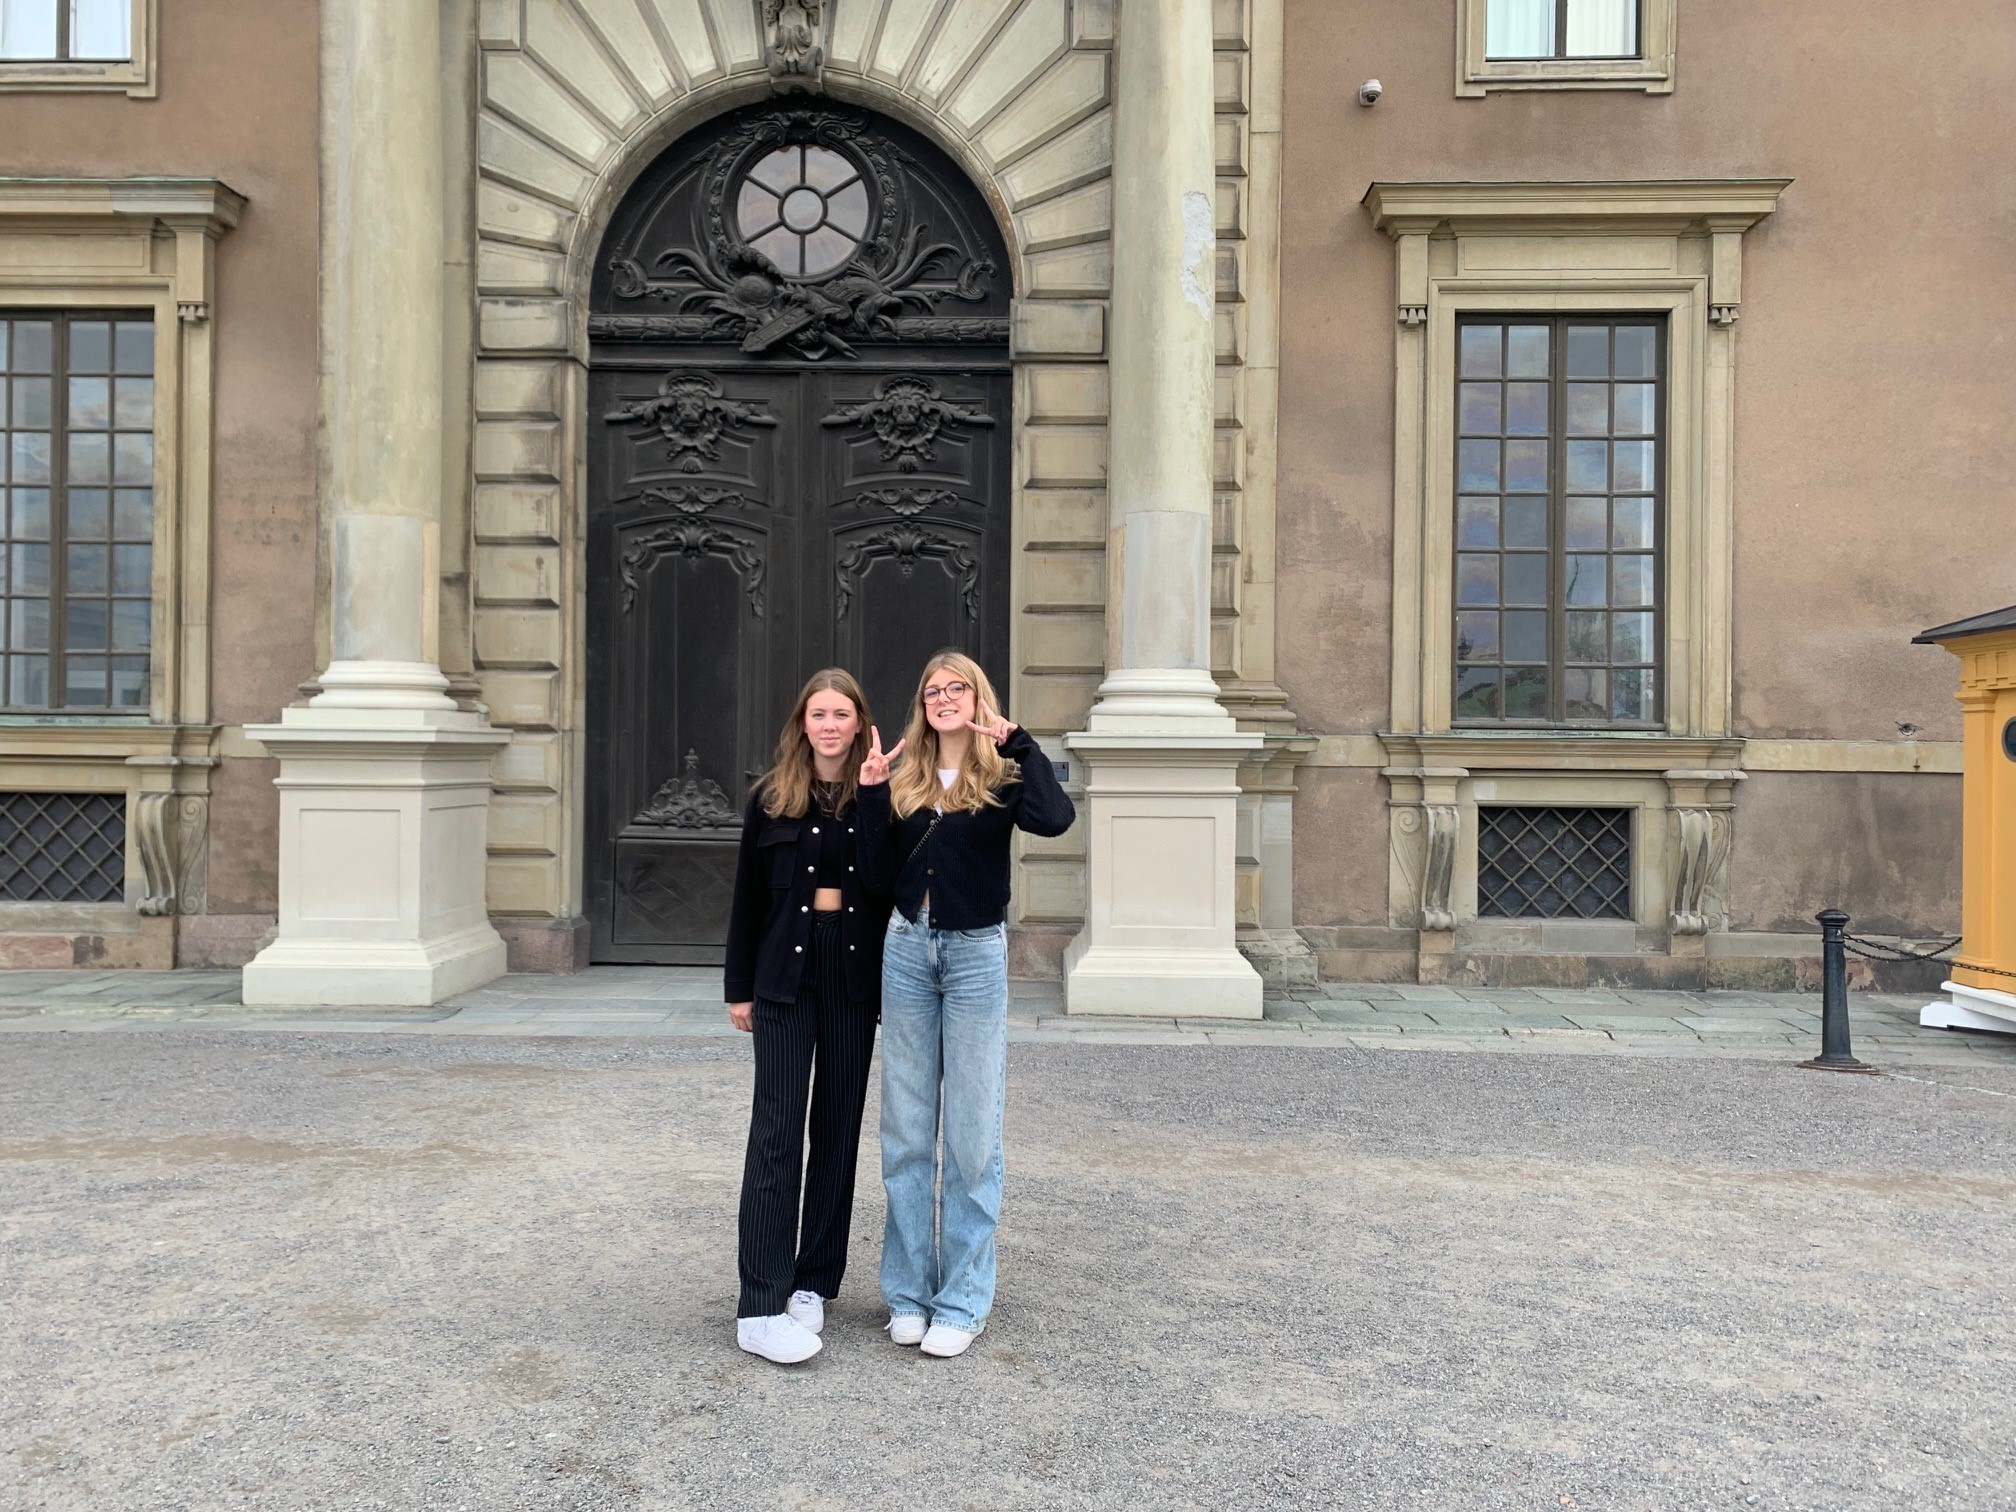 Victoria's dauthers visiting Stockholm